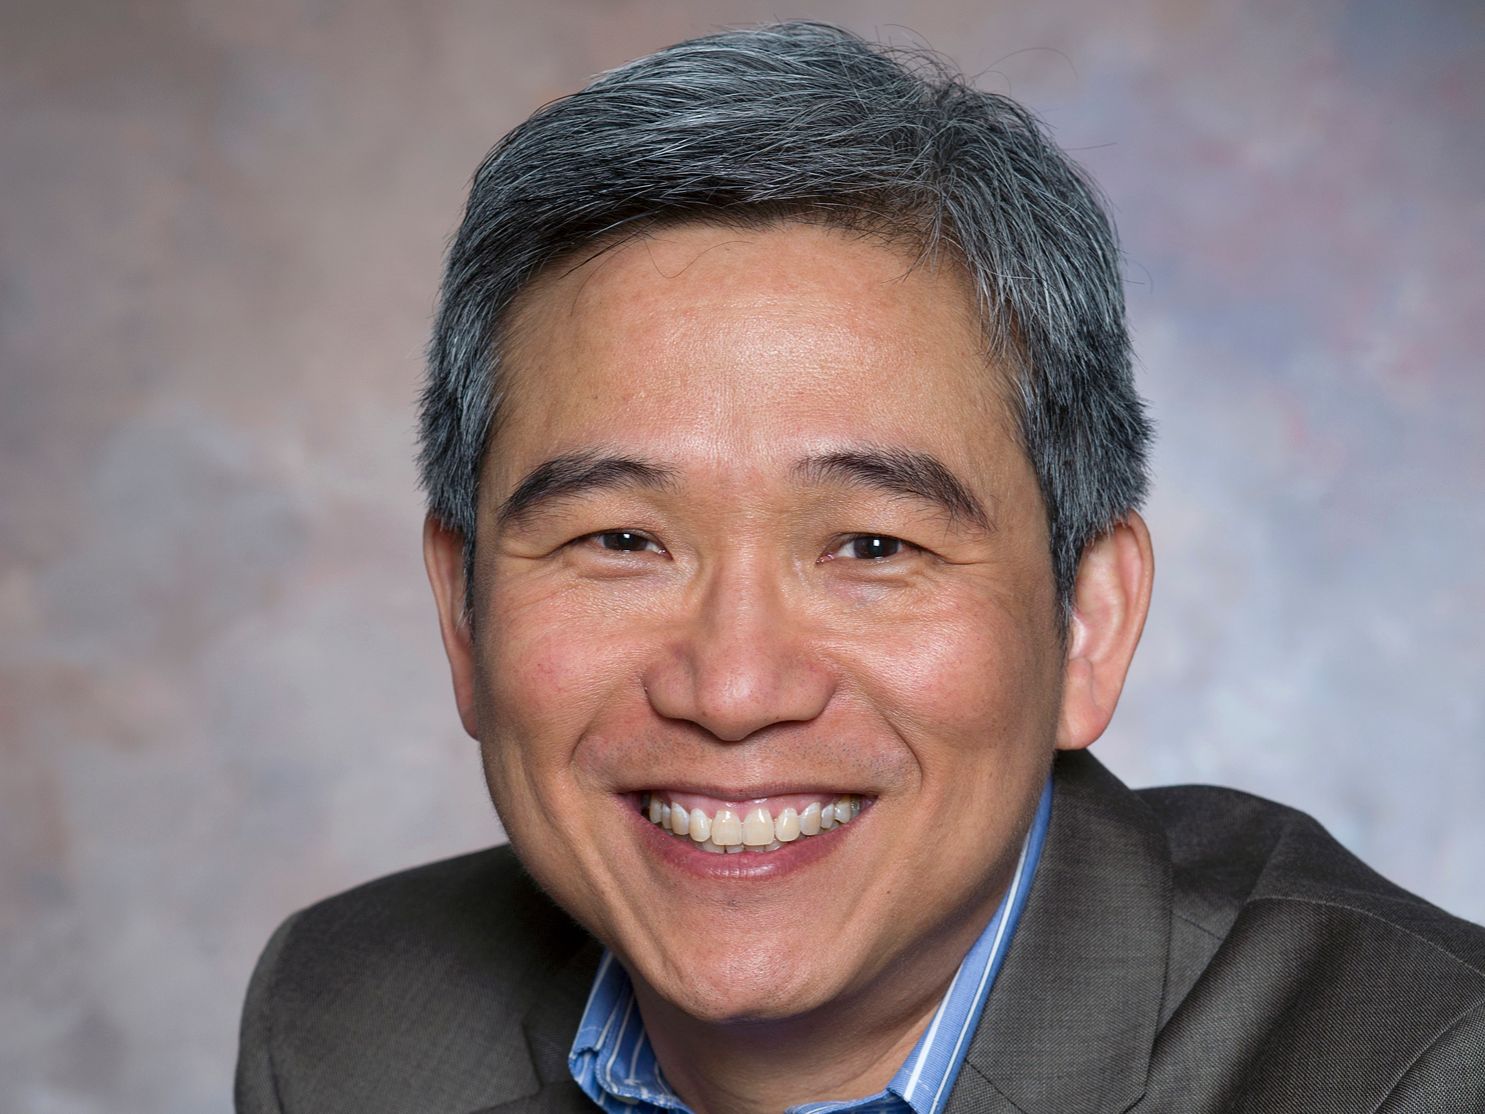 Chun-Keung (Stan) Hoi is Professor in Accounting at the Faculty of Economics and Business of the University of Groningen and also teaches at the Rochester Institute of Technology in New York. He researches tax avoidance, social capital, social responsibility, and corporate governance.